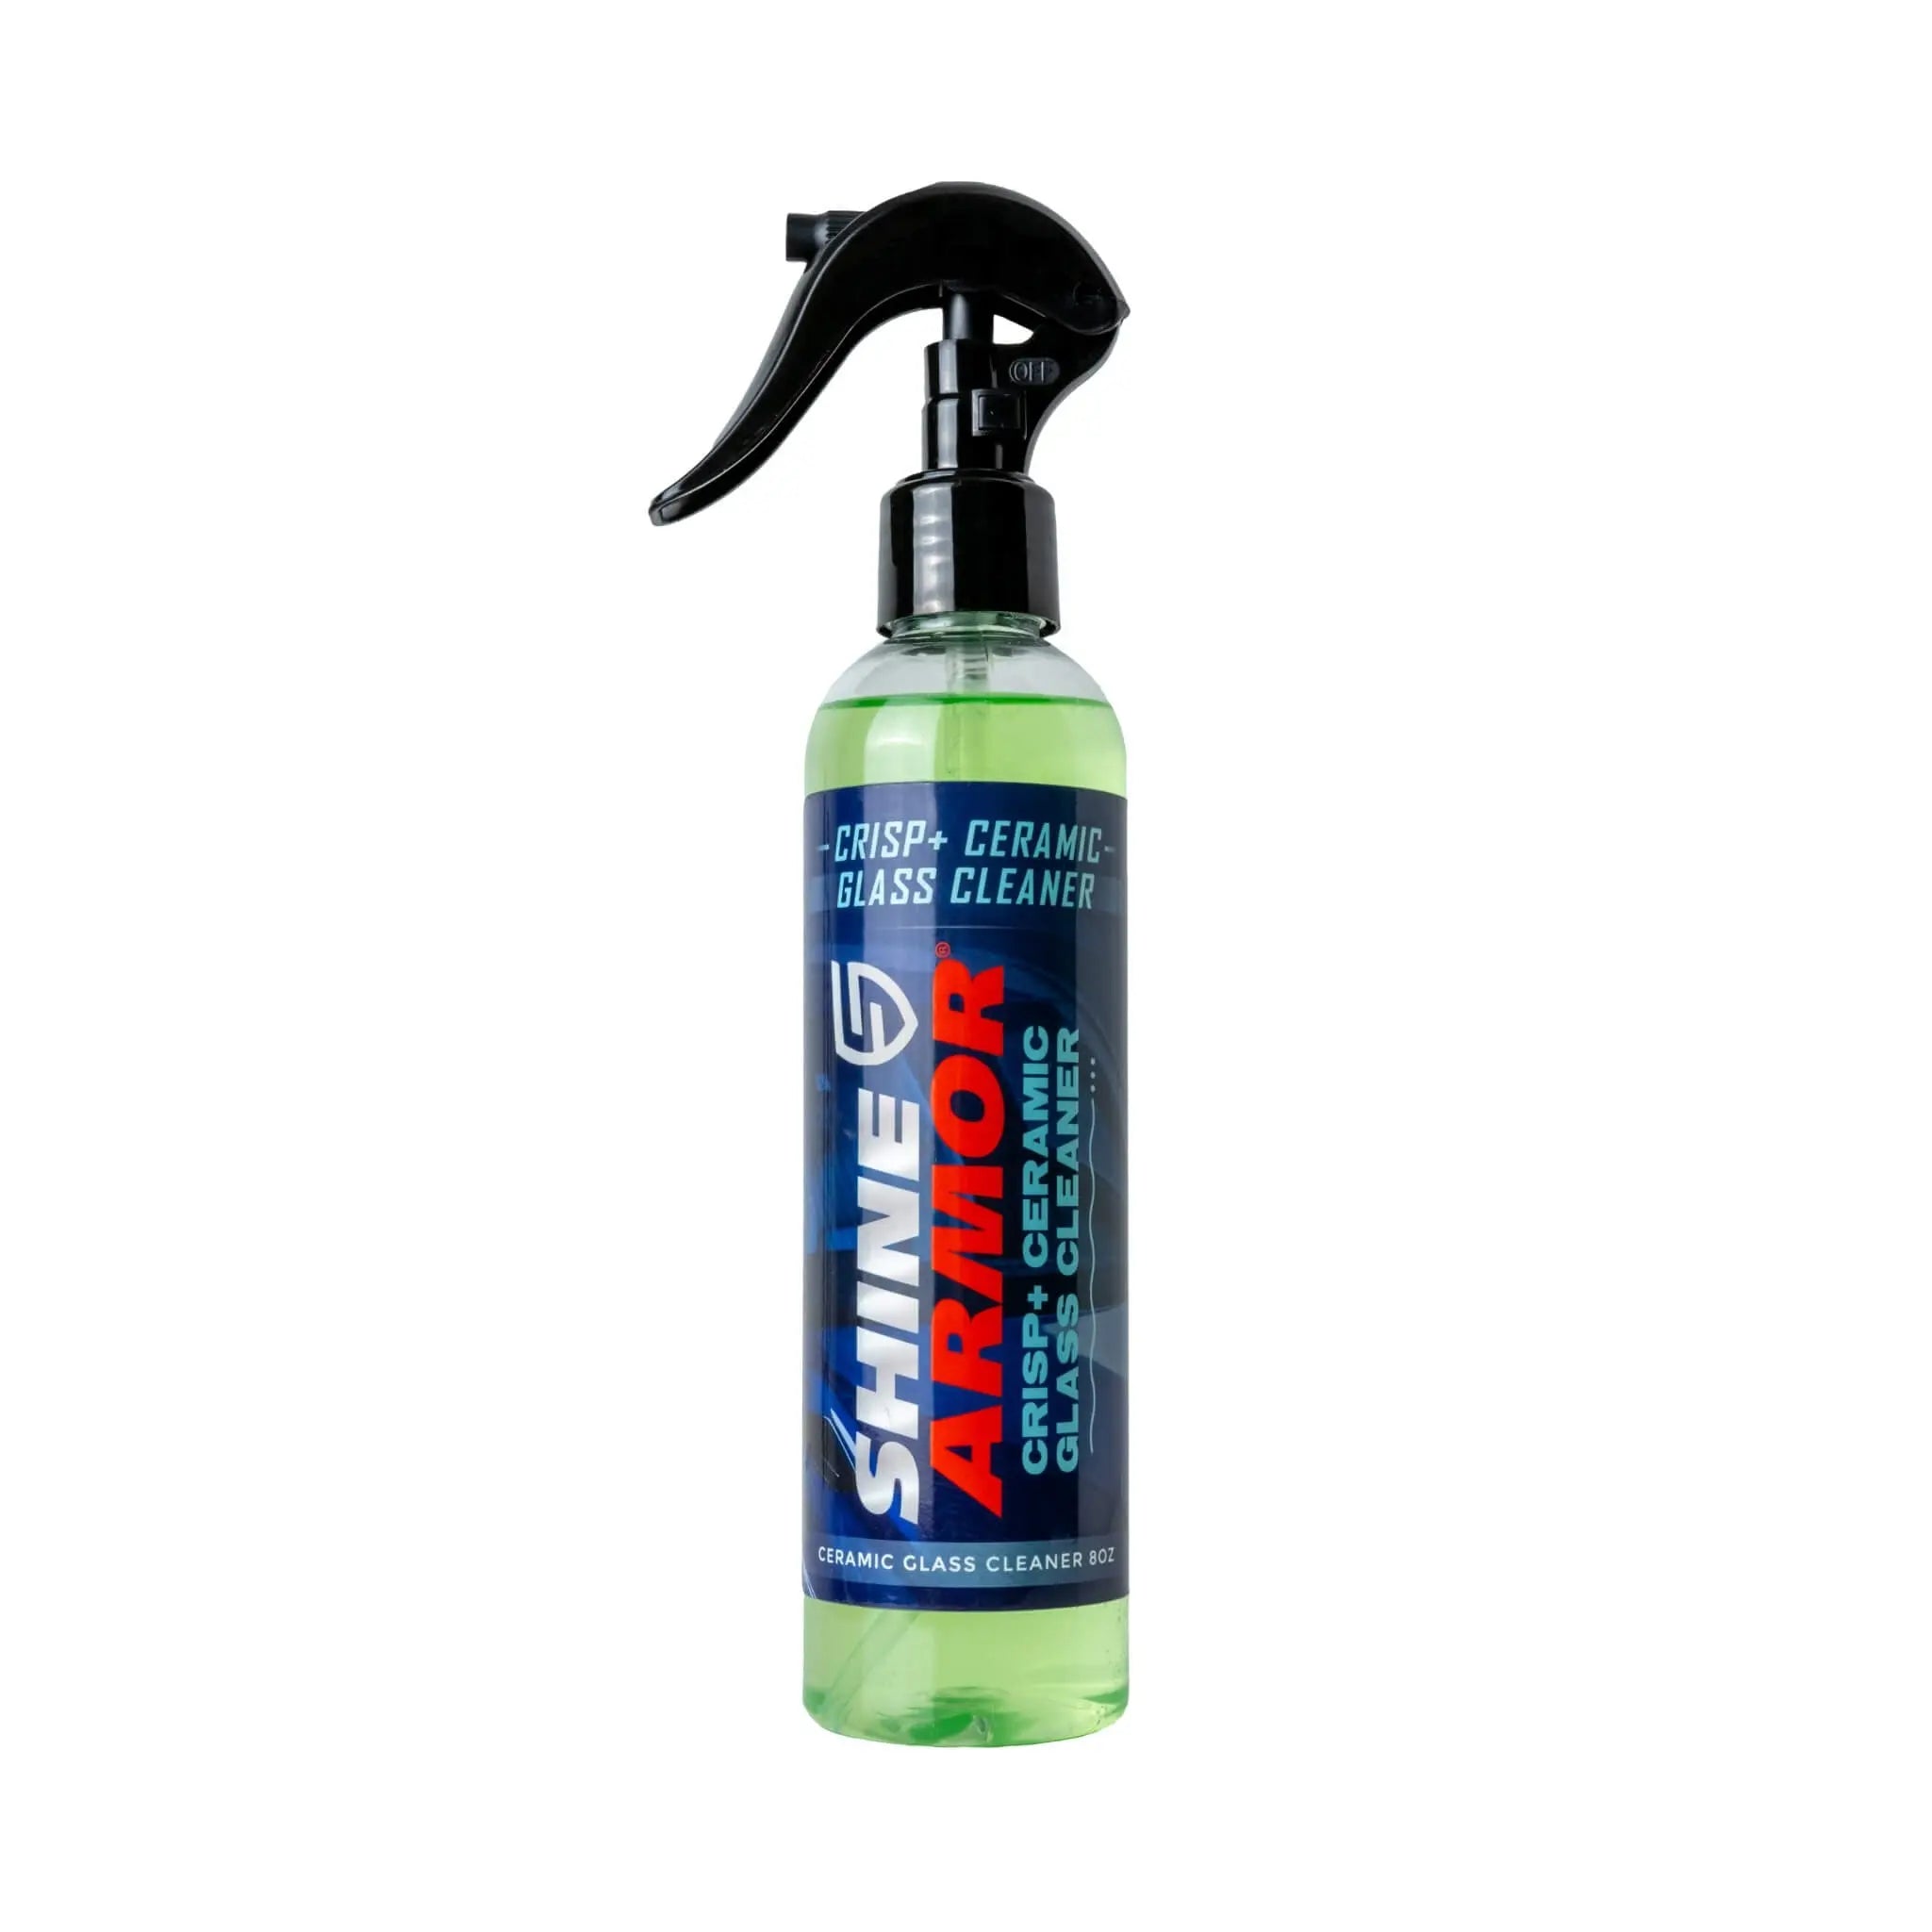 Cetris Foaming Glass Cleaner & Surfaces 539 ml